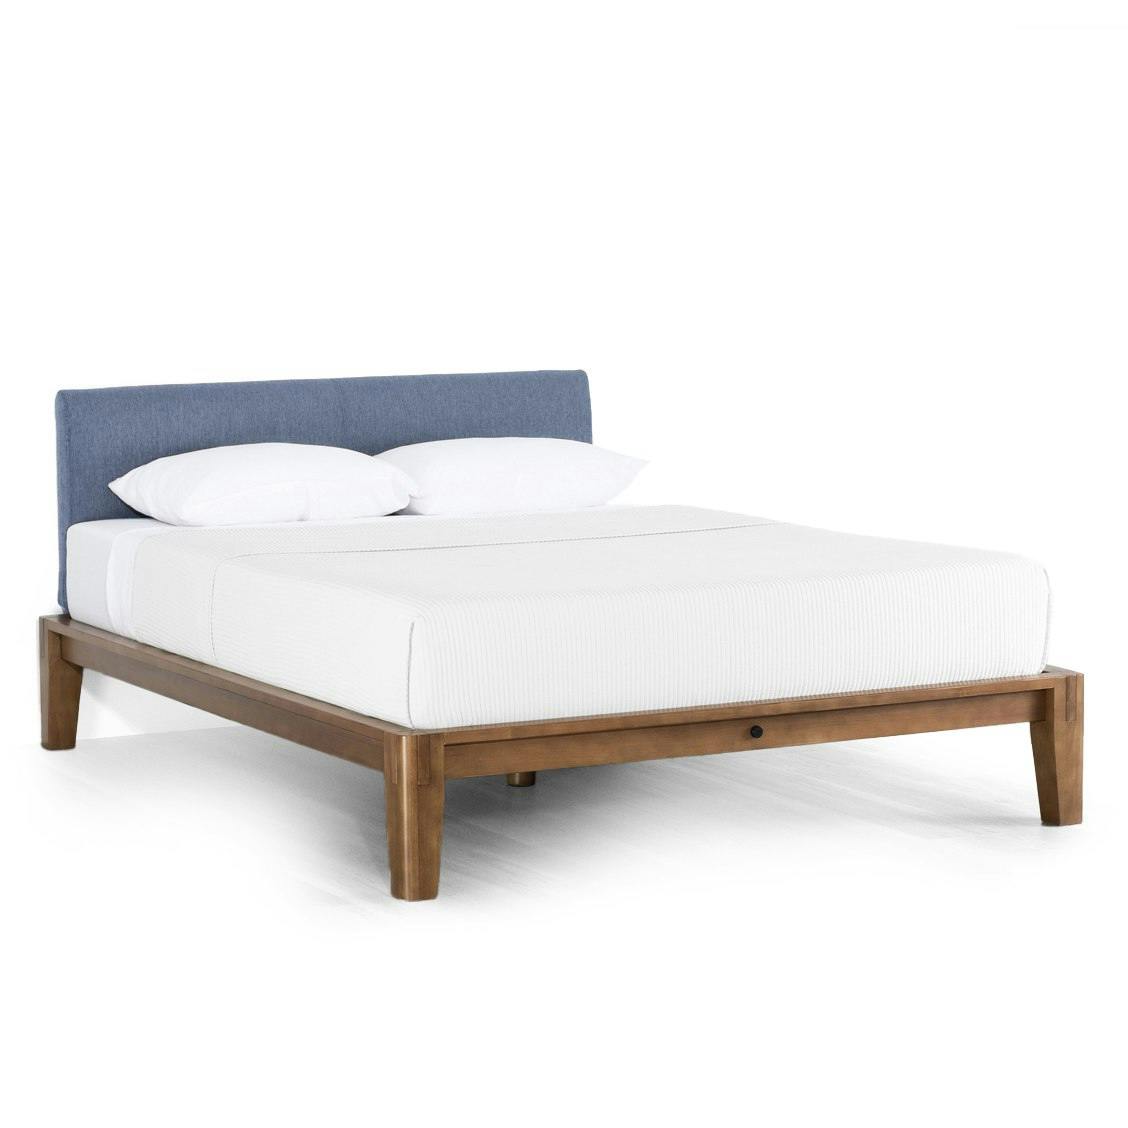 The Bed - King - Huckberry Exclusive